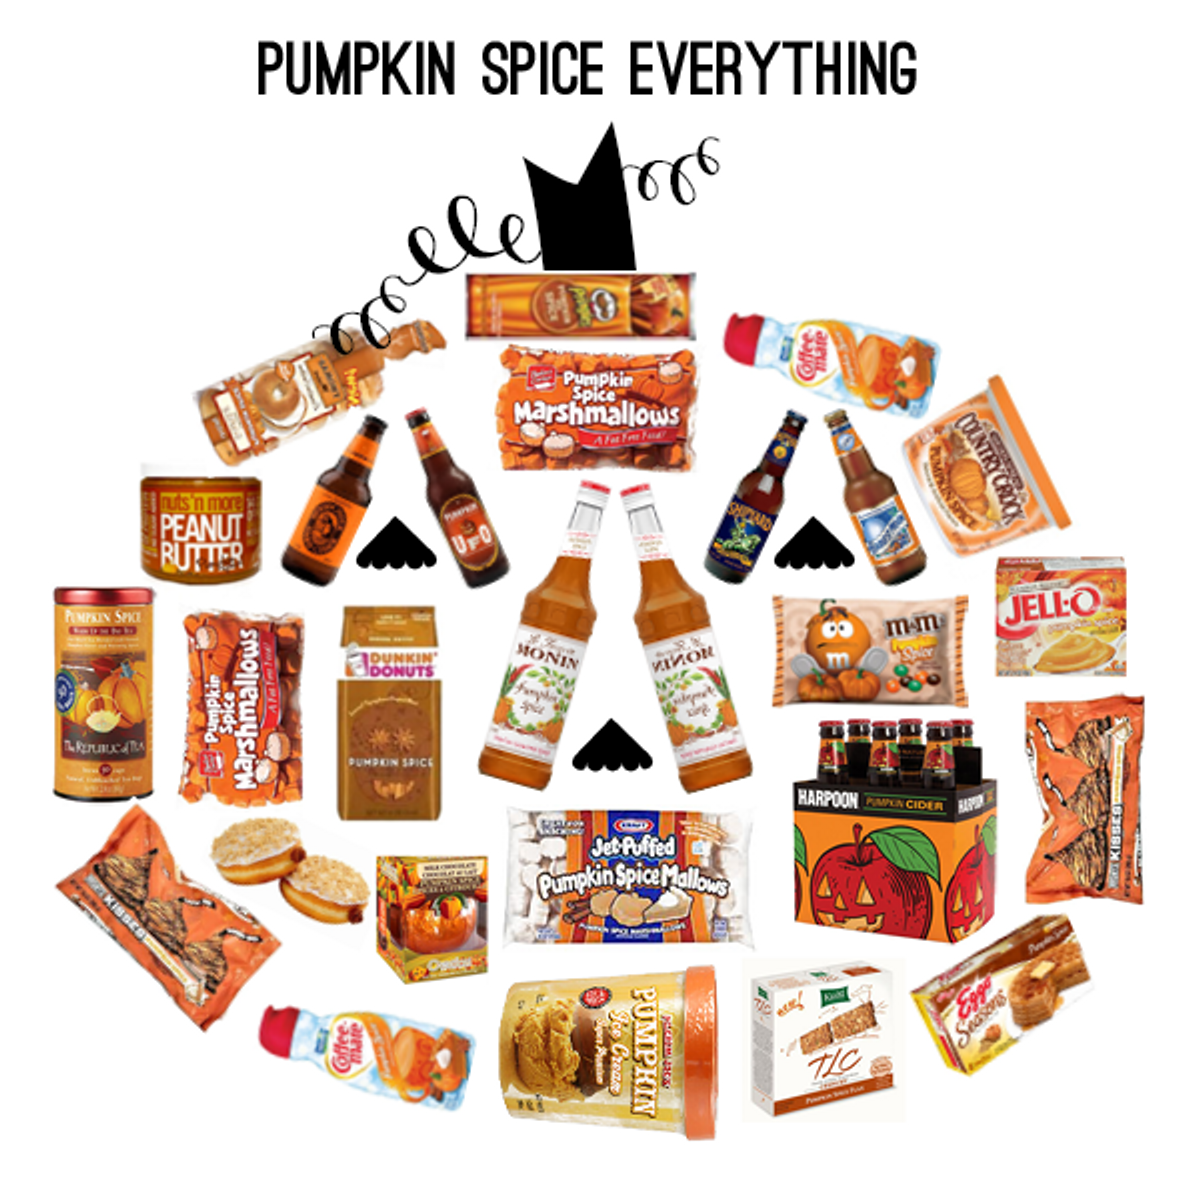 20 Pumpkin Spice Products That Test Society's Limits